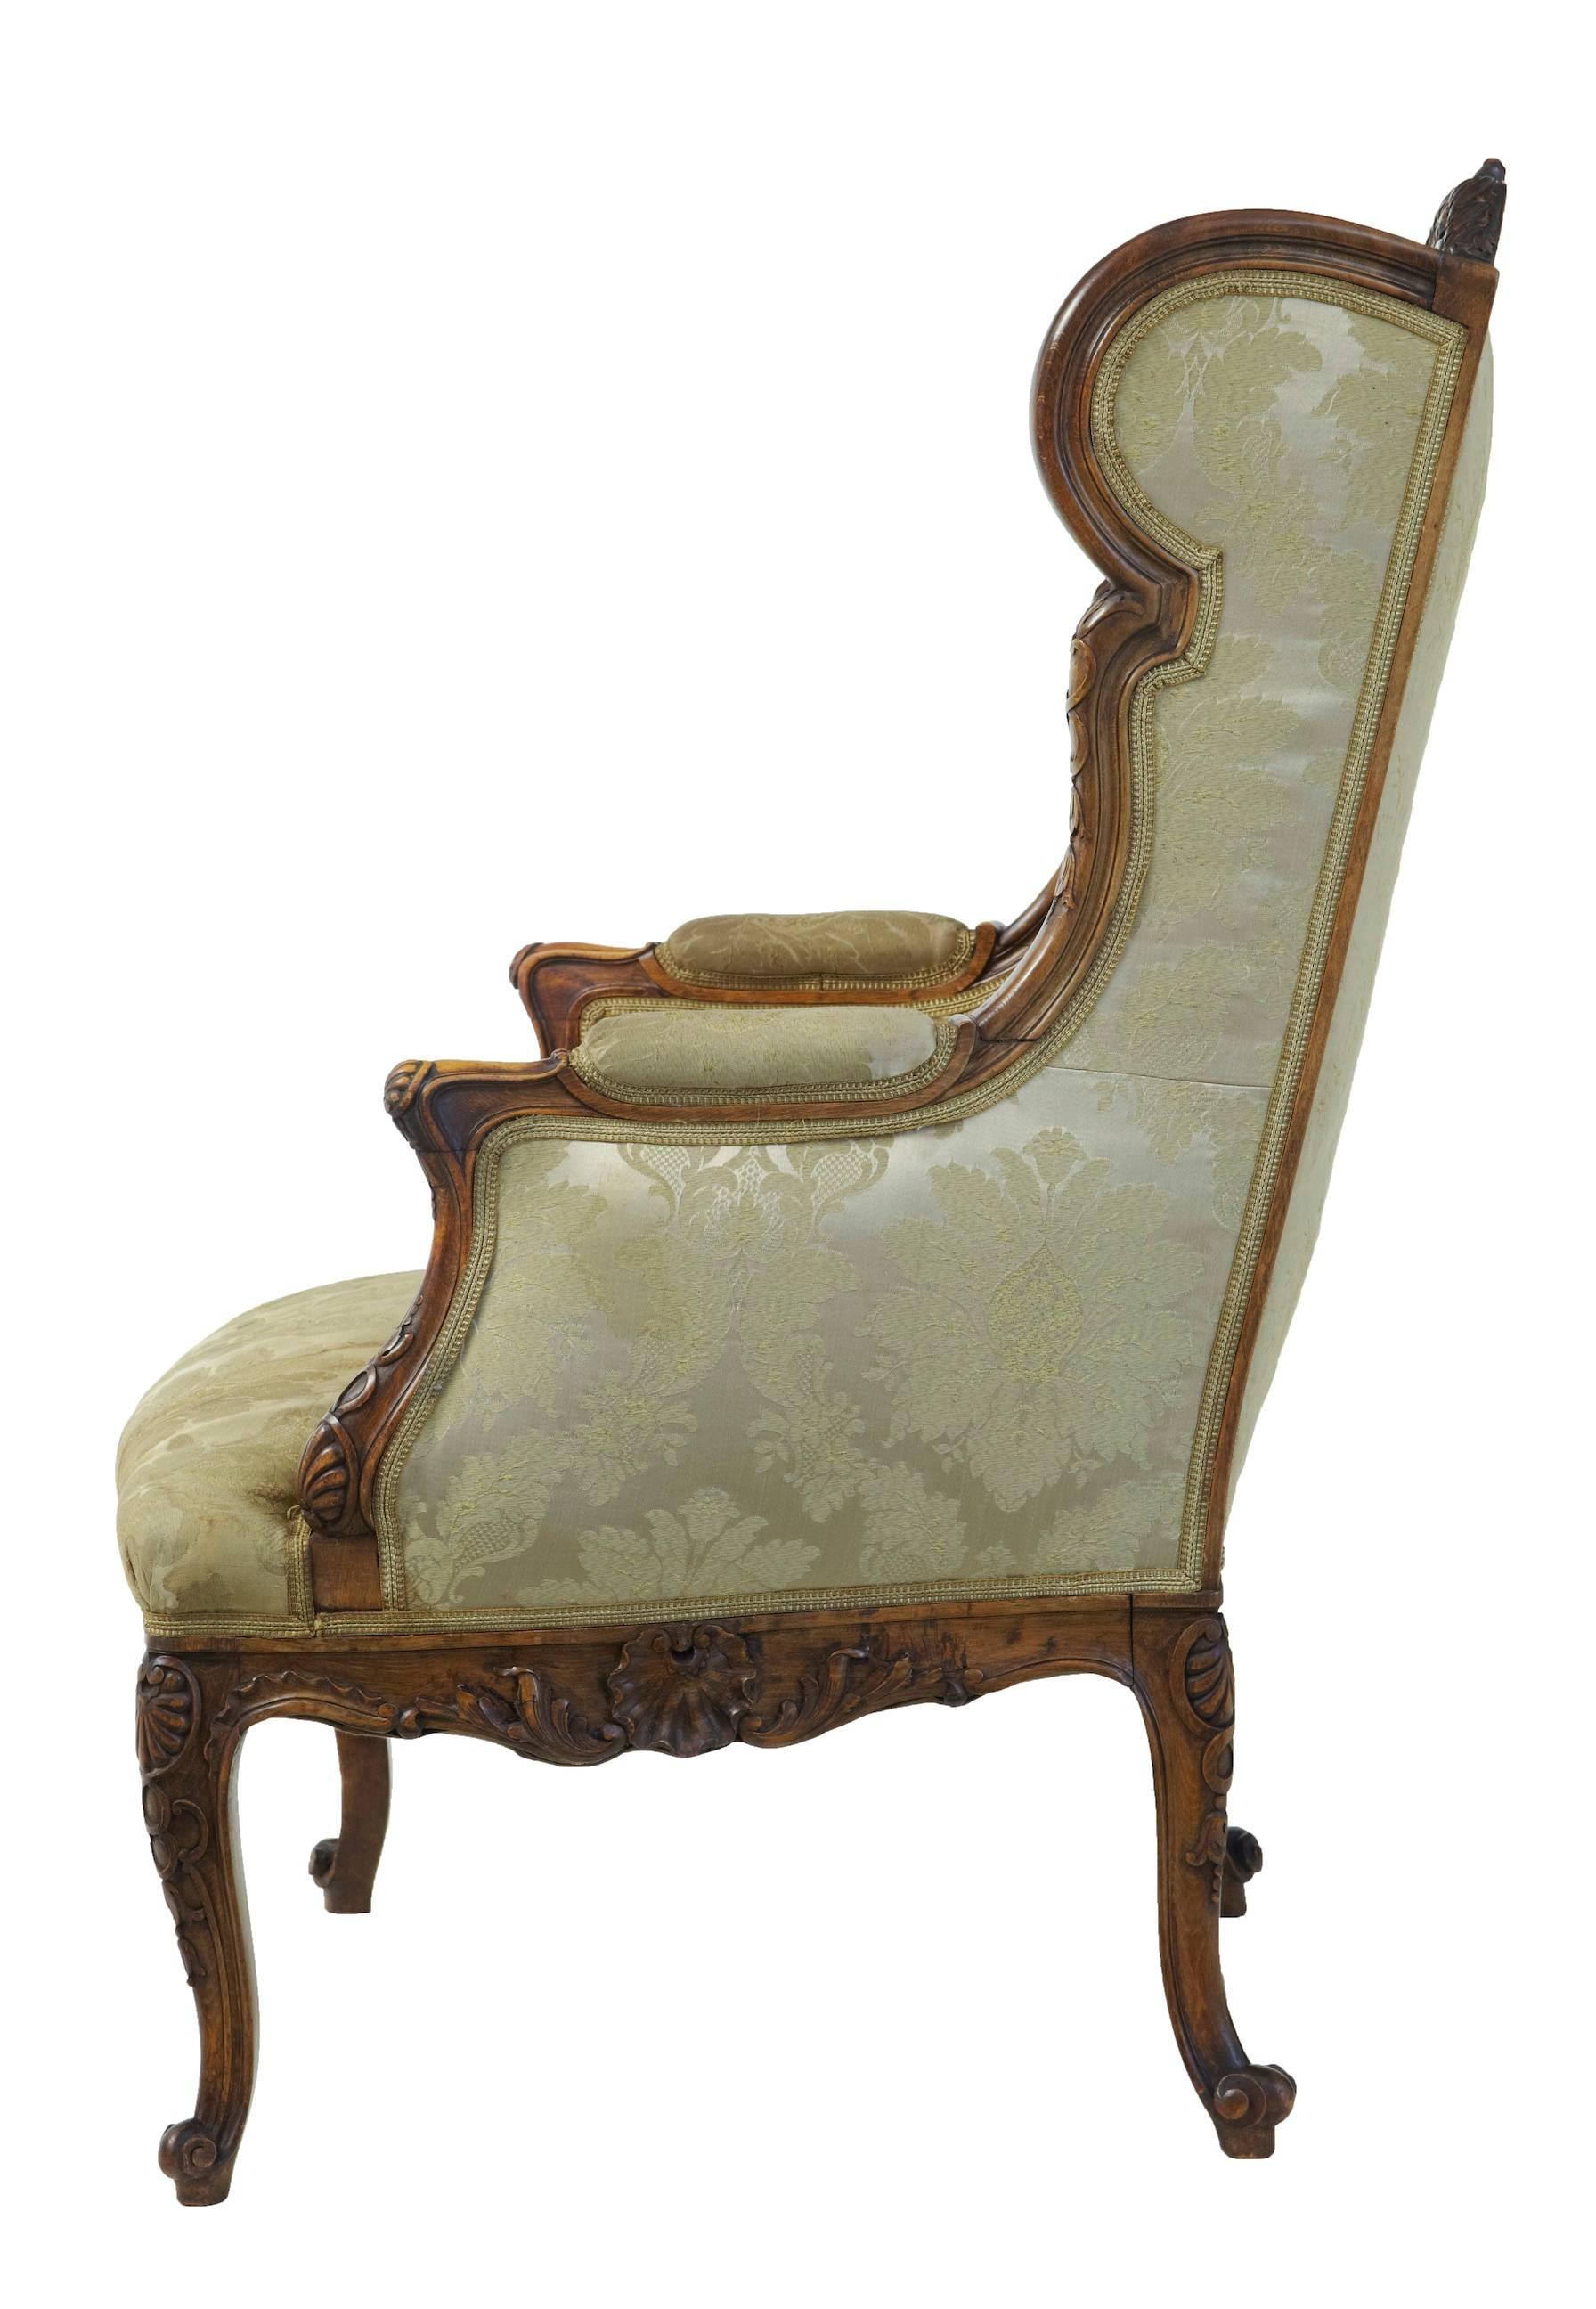 Beautiful carved wingback french armchair circa 1870.
Carved with shells to the back, arms and legs.
Some staining to fabric on the seat which would need a deep clean.

Height: 43